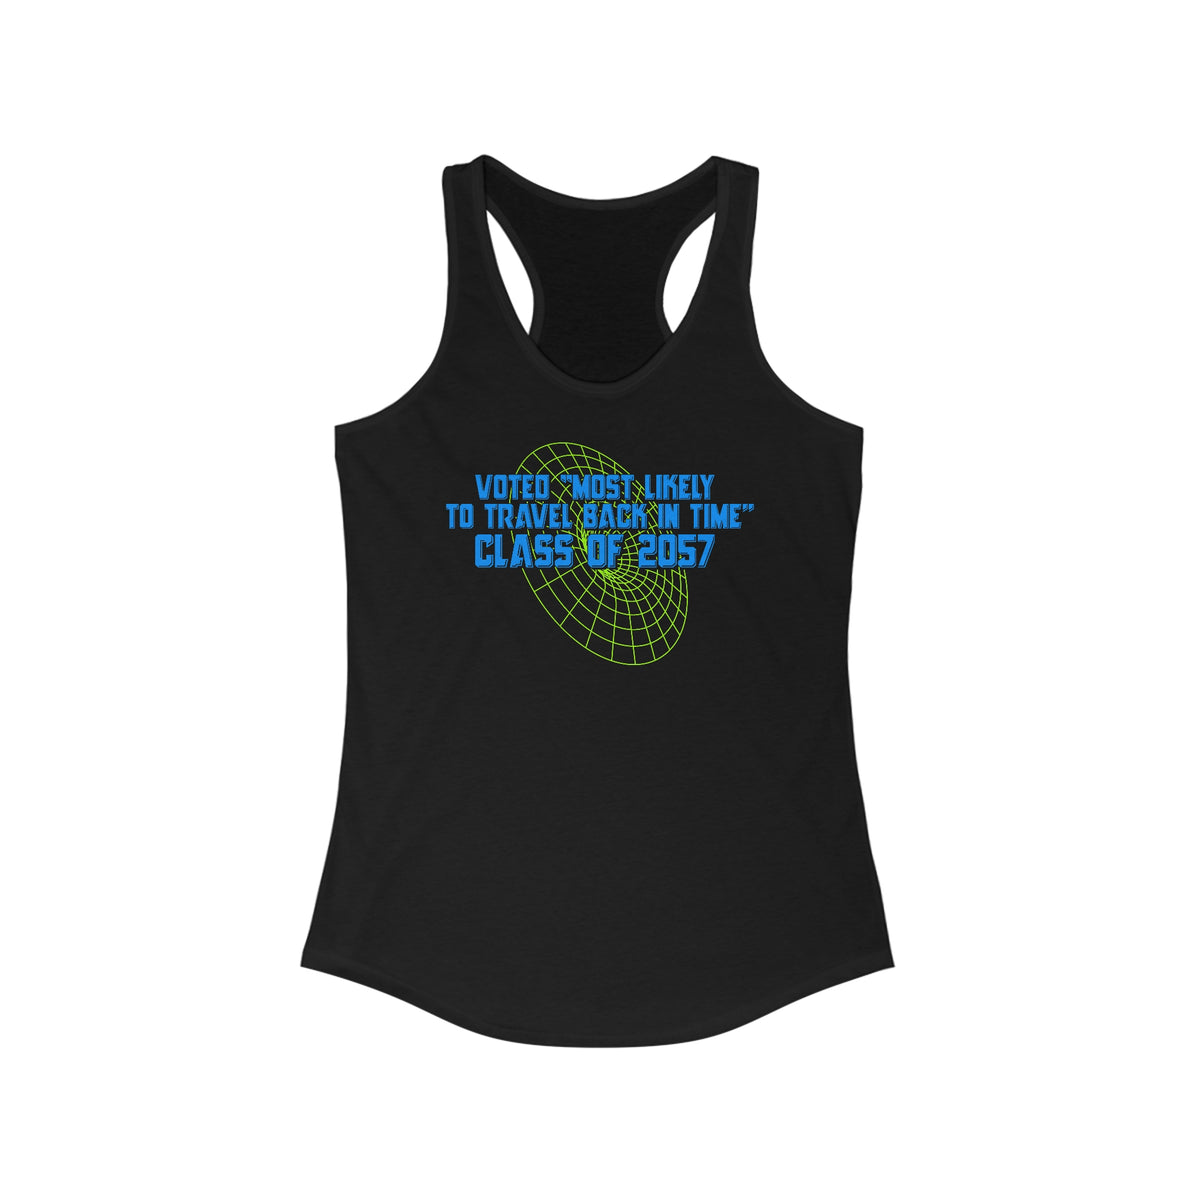 Voted "Most Likely To Travel Back In Time" - Women’s Racerback Tank